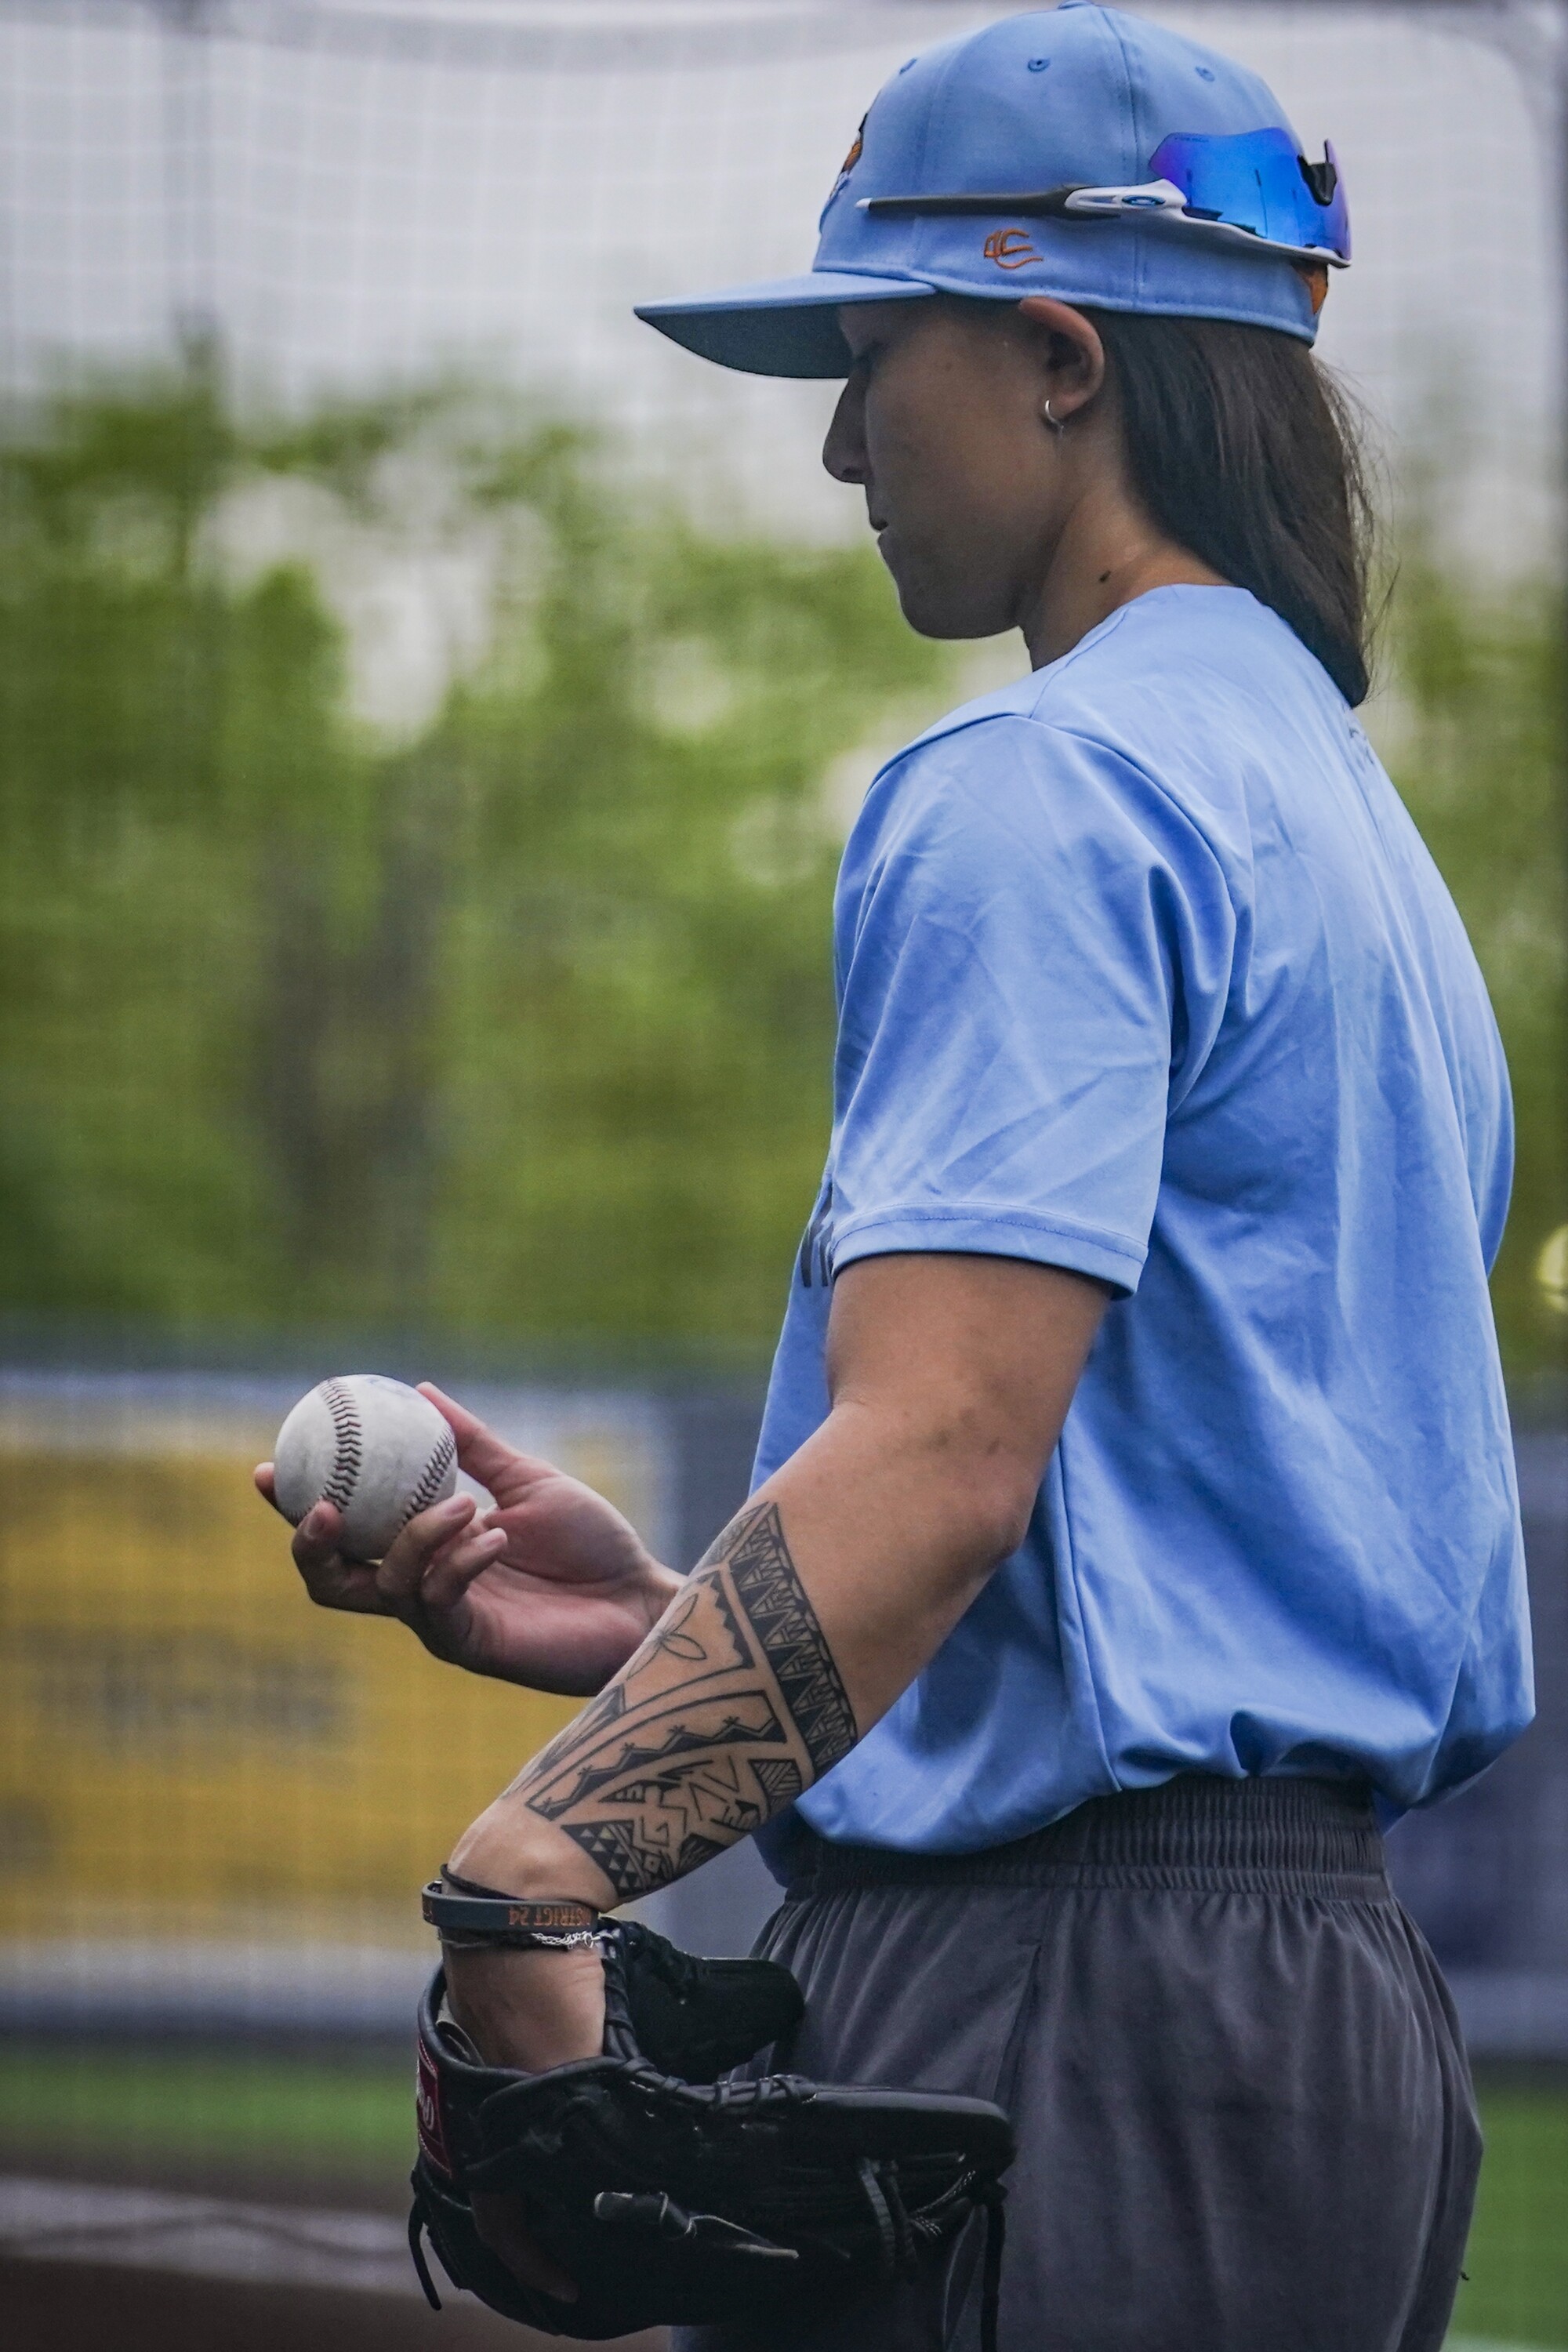 Kelsie Whitmore, a two-way player for the Atlantic League's Staten Island FerryHawks, holds a baseball